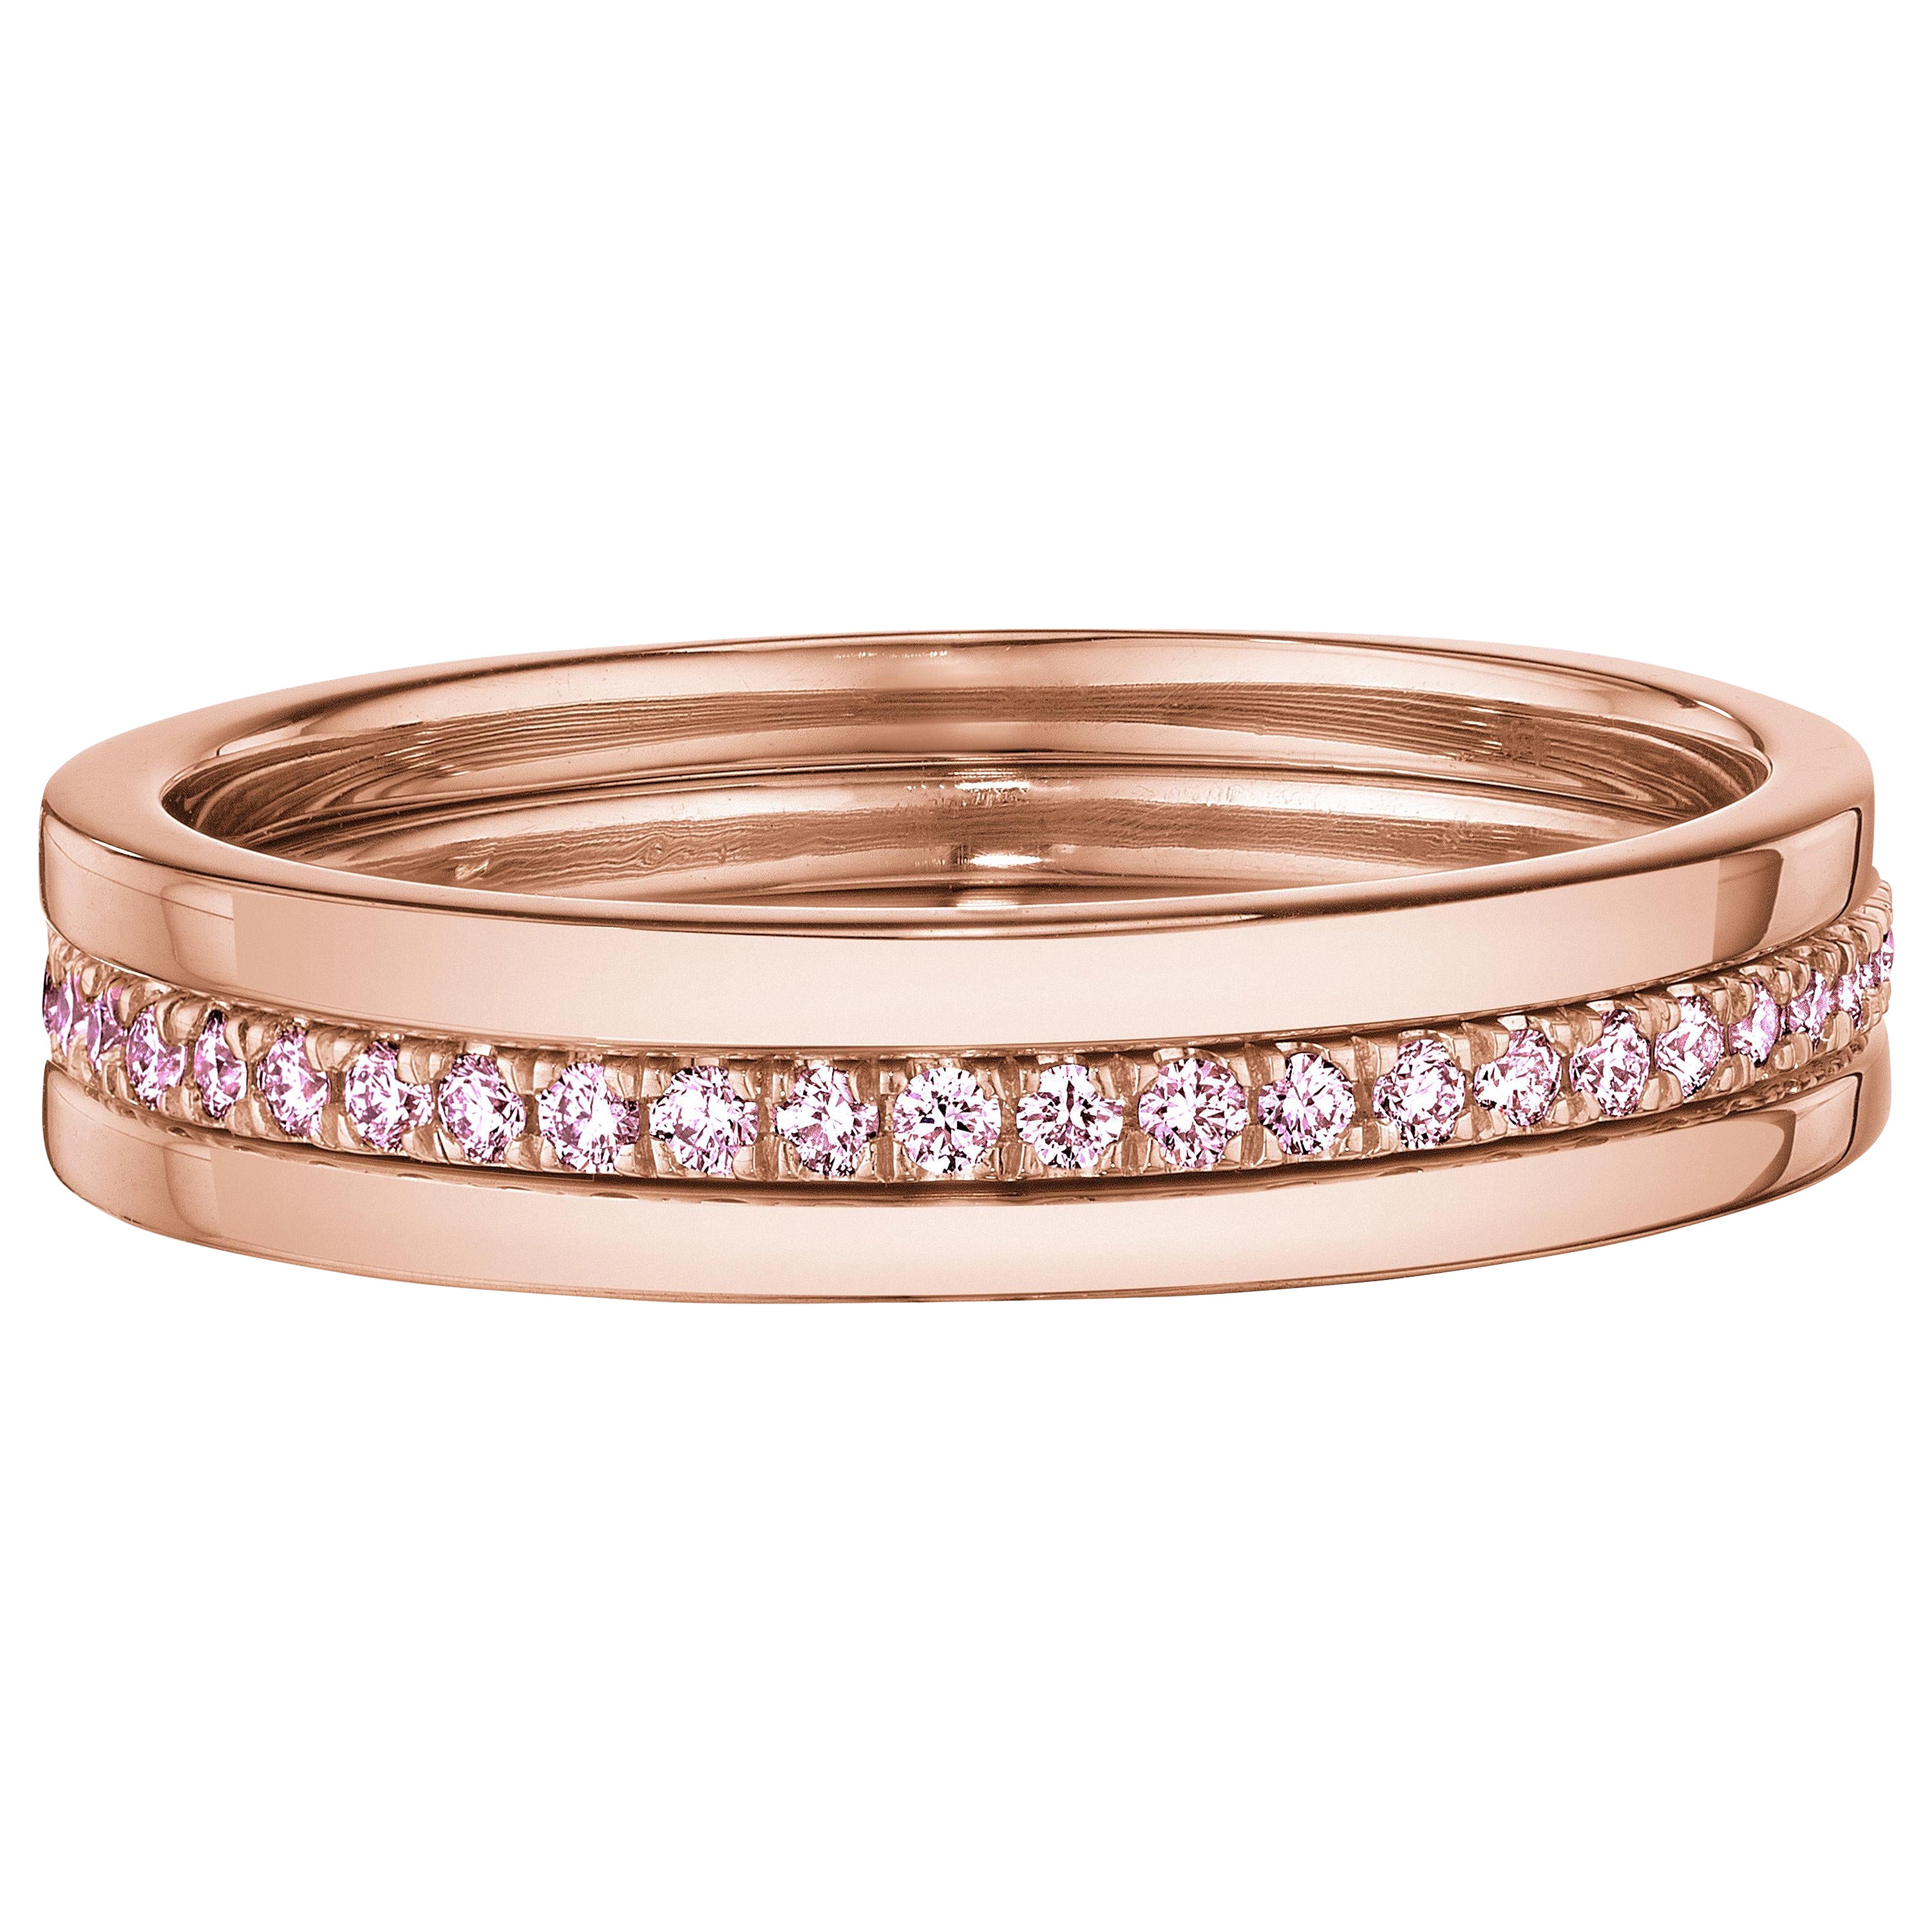 For Sale:  Natural Fancy Pink Diamond Stackable Ring Set in 18K Rose Gold